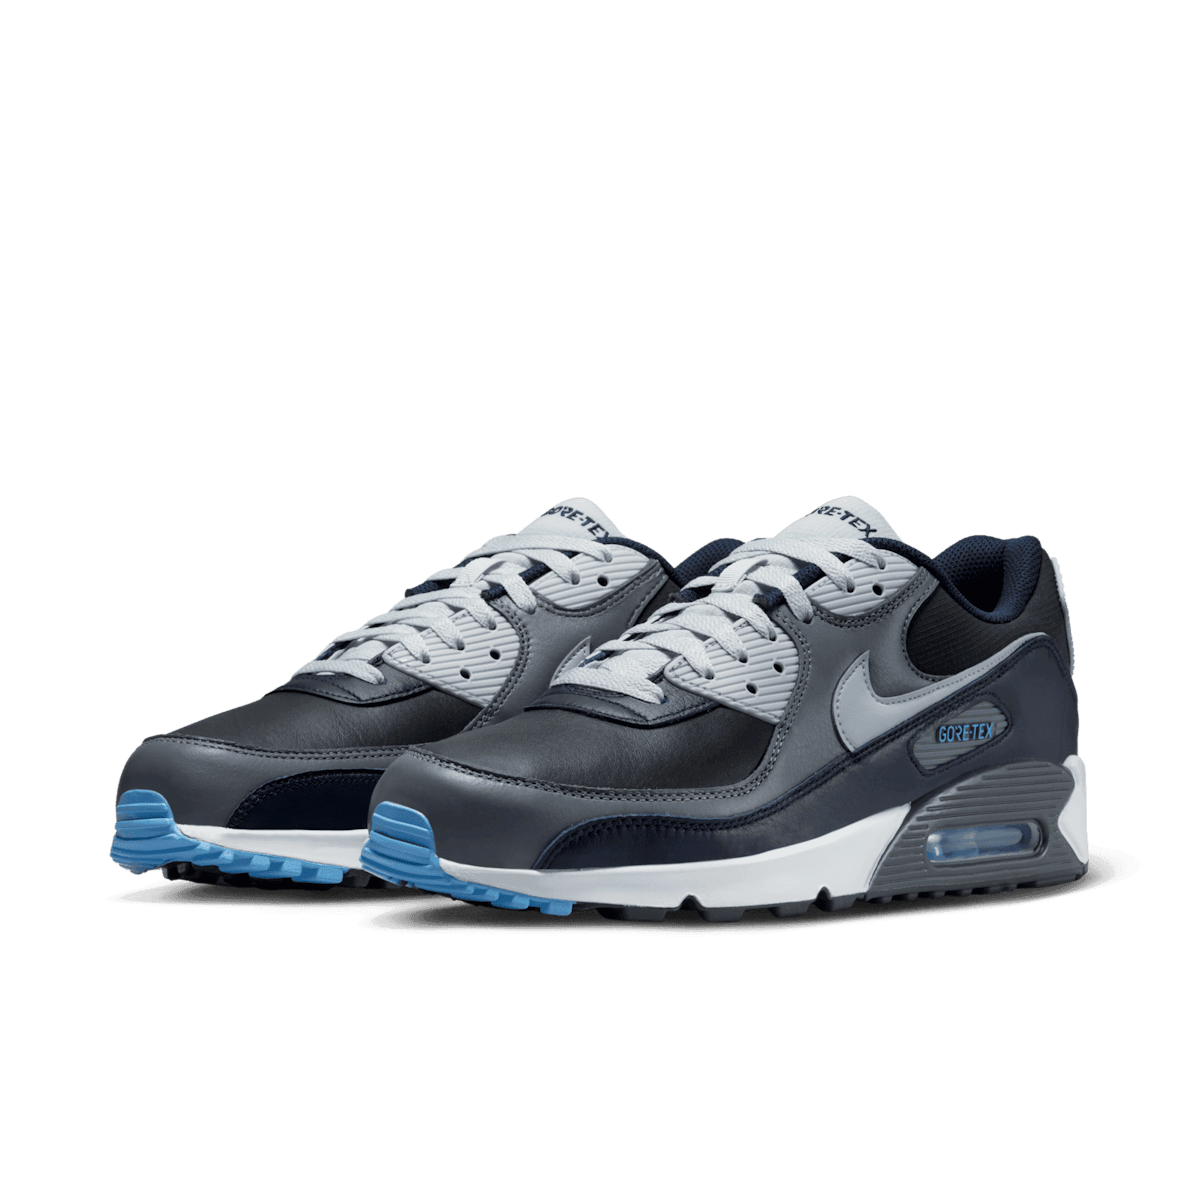 Nike Air Max 90 Gore-Tex Anthracite Obsidian Angle 2